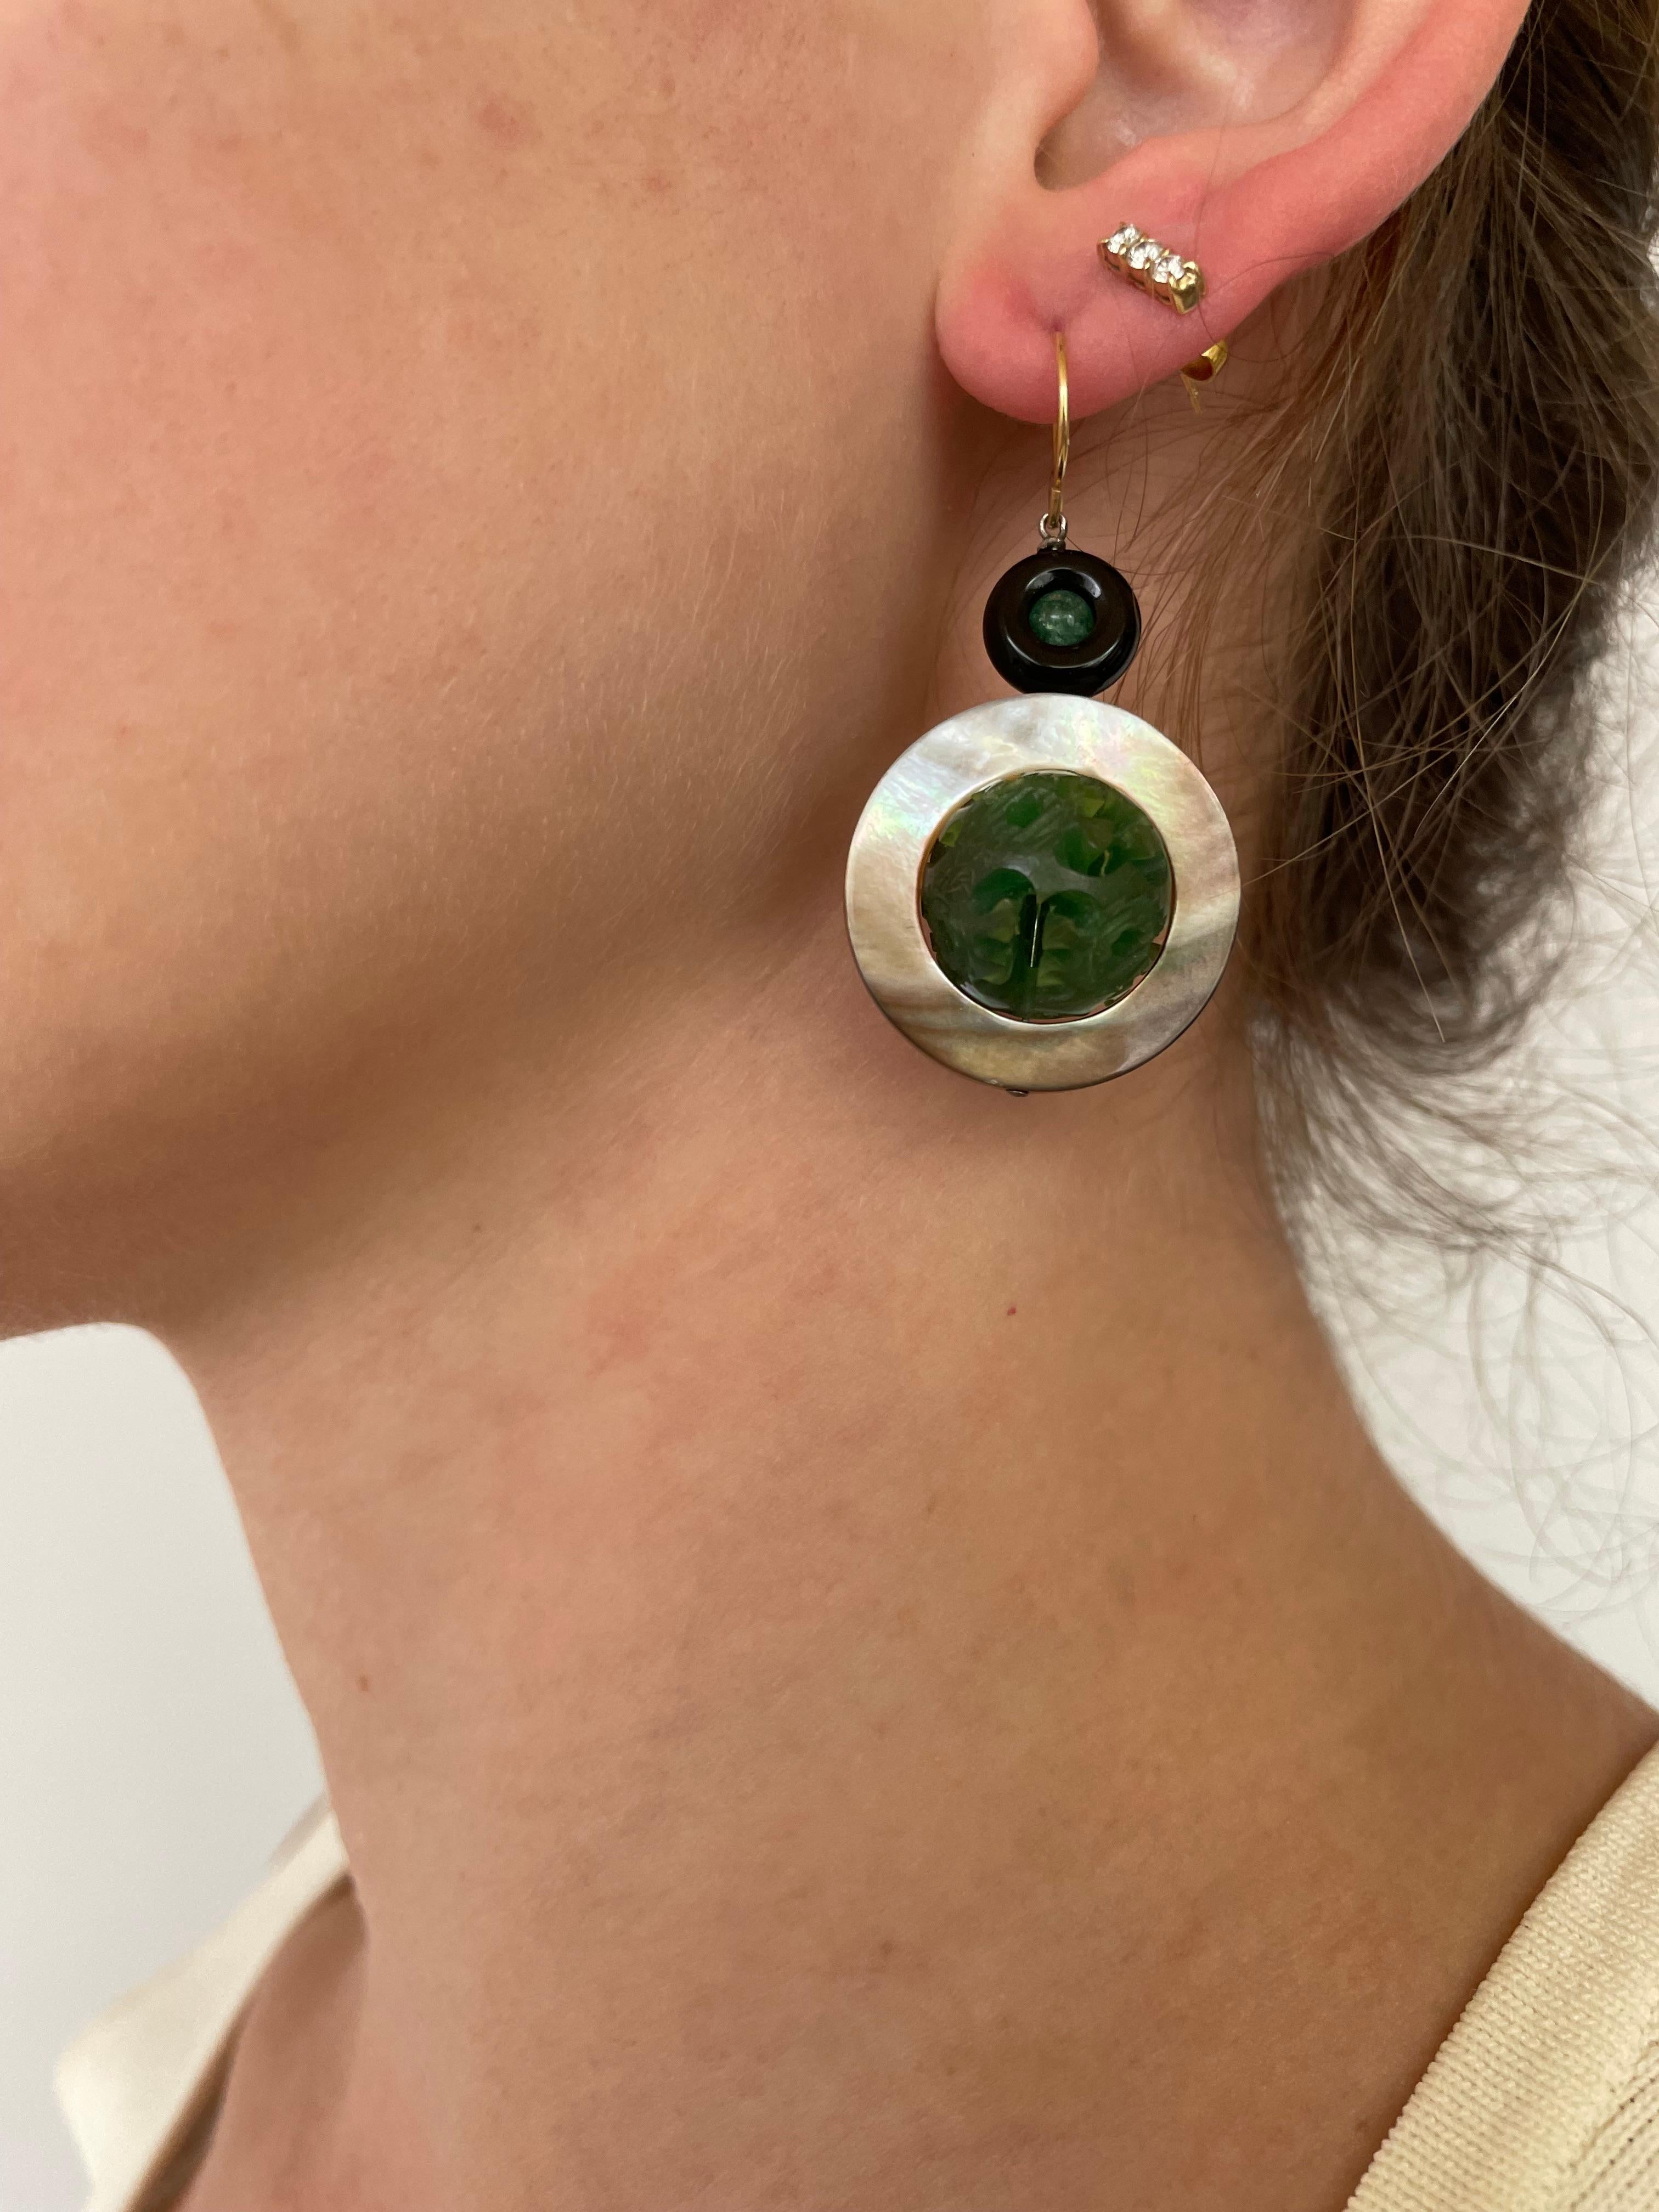 Striking pair of earrings made by Marina J. Measuring 2 inches long, these earrings feature vintage Bakolite from the 1930's reworked into this pair. A small but vibrant Emerald Bead sits inside a Black Onyx Ring, from which a Mother of Pearl Ring